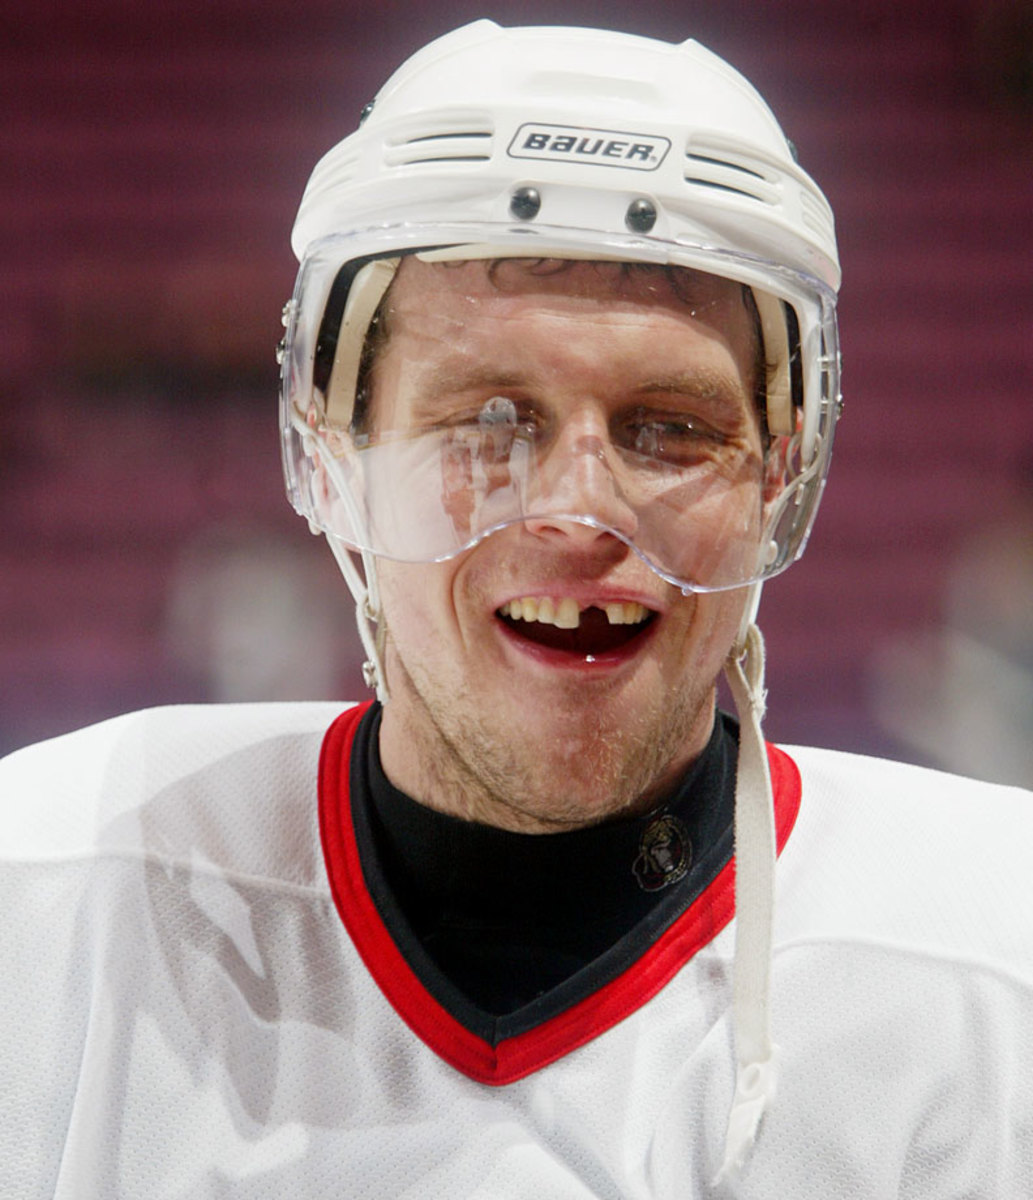 NHL players say losing their teeth is just part of the game